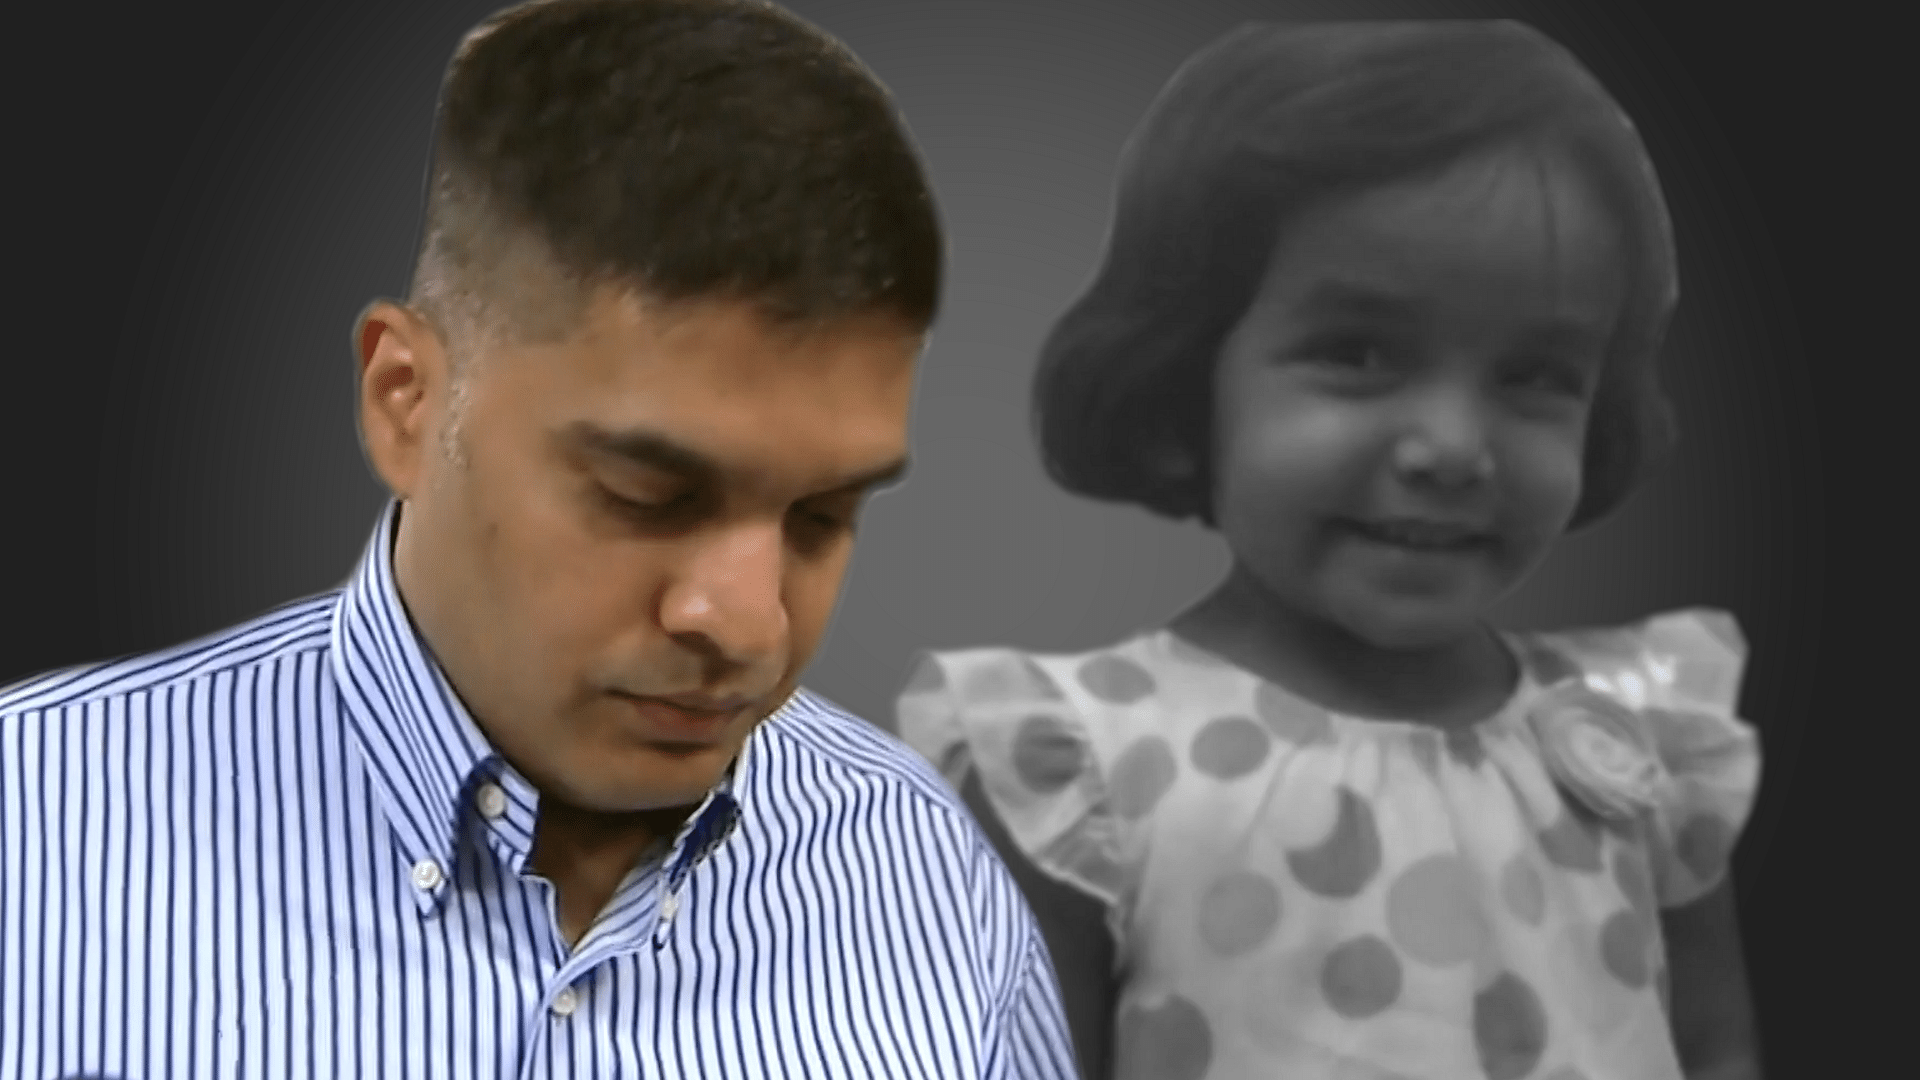 Adopted Indian girl Sherin found dead in Texas.